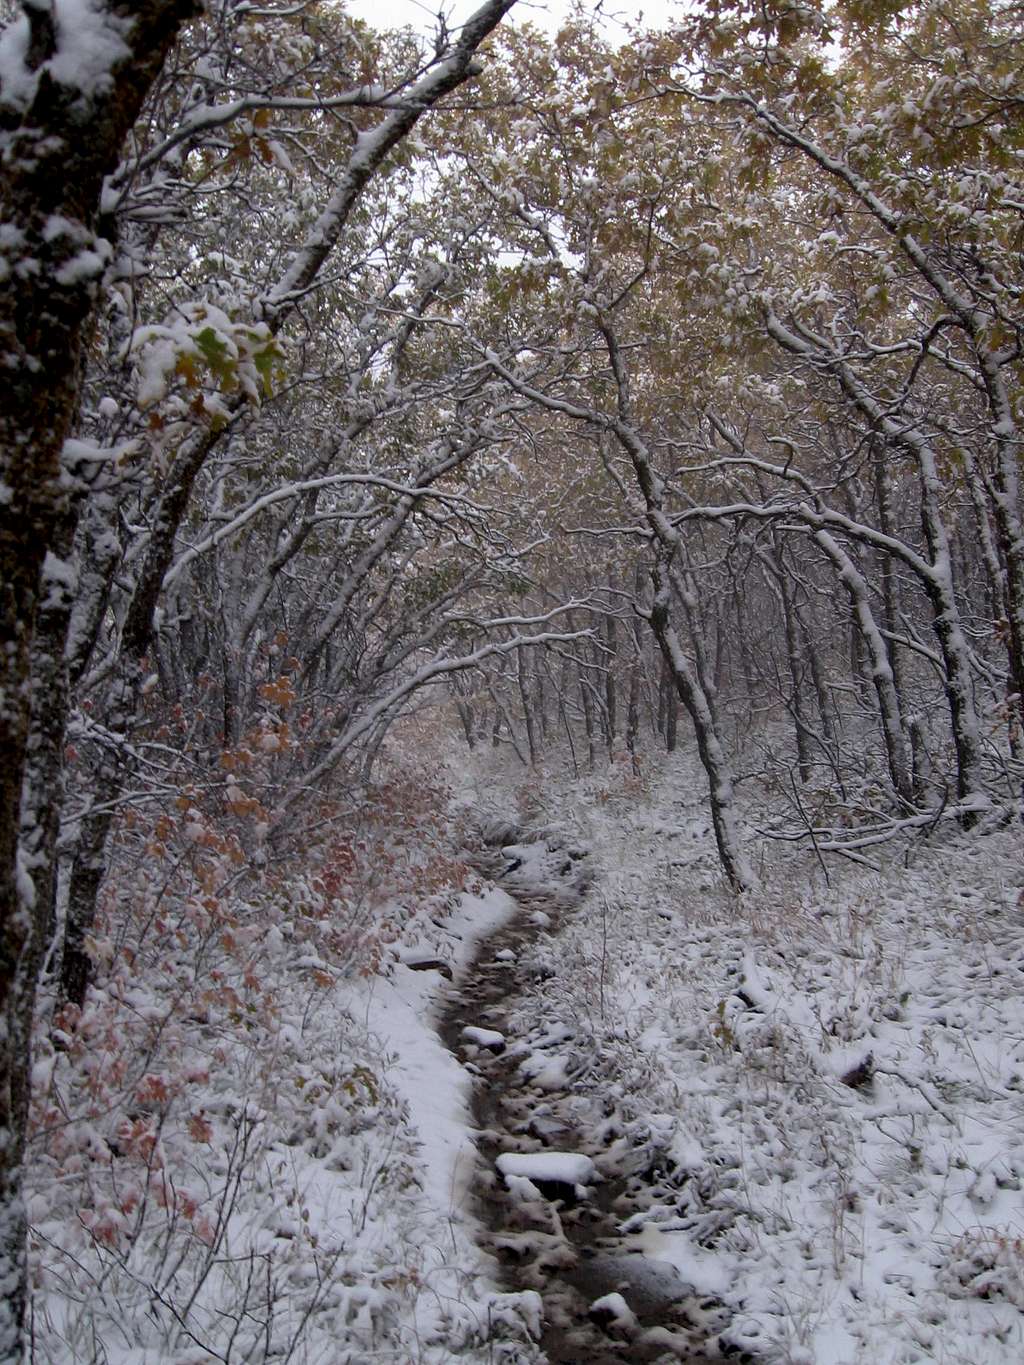 Fall/winter wonderland in Georges Hollow